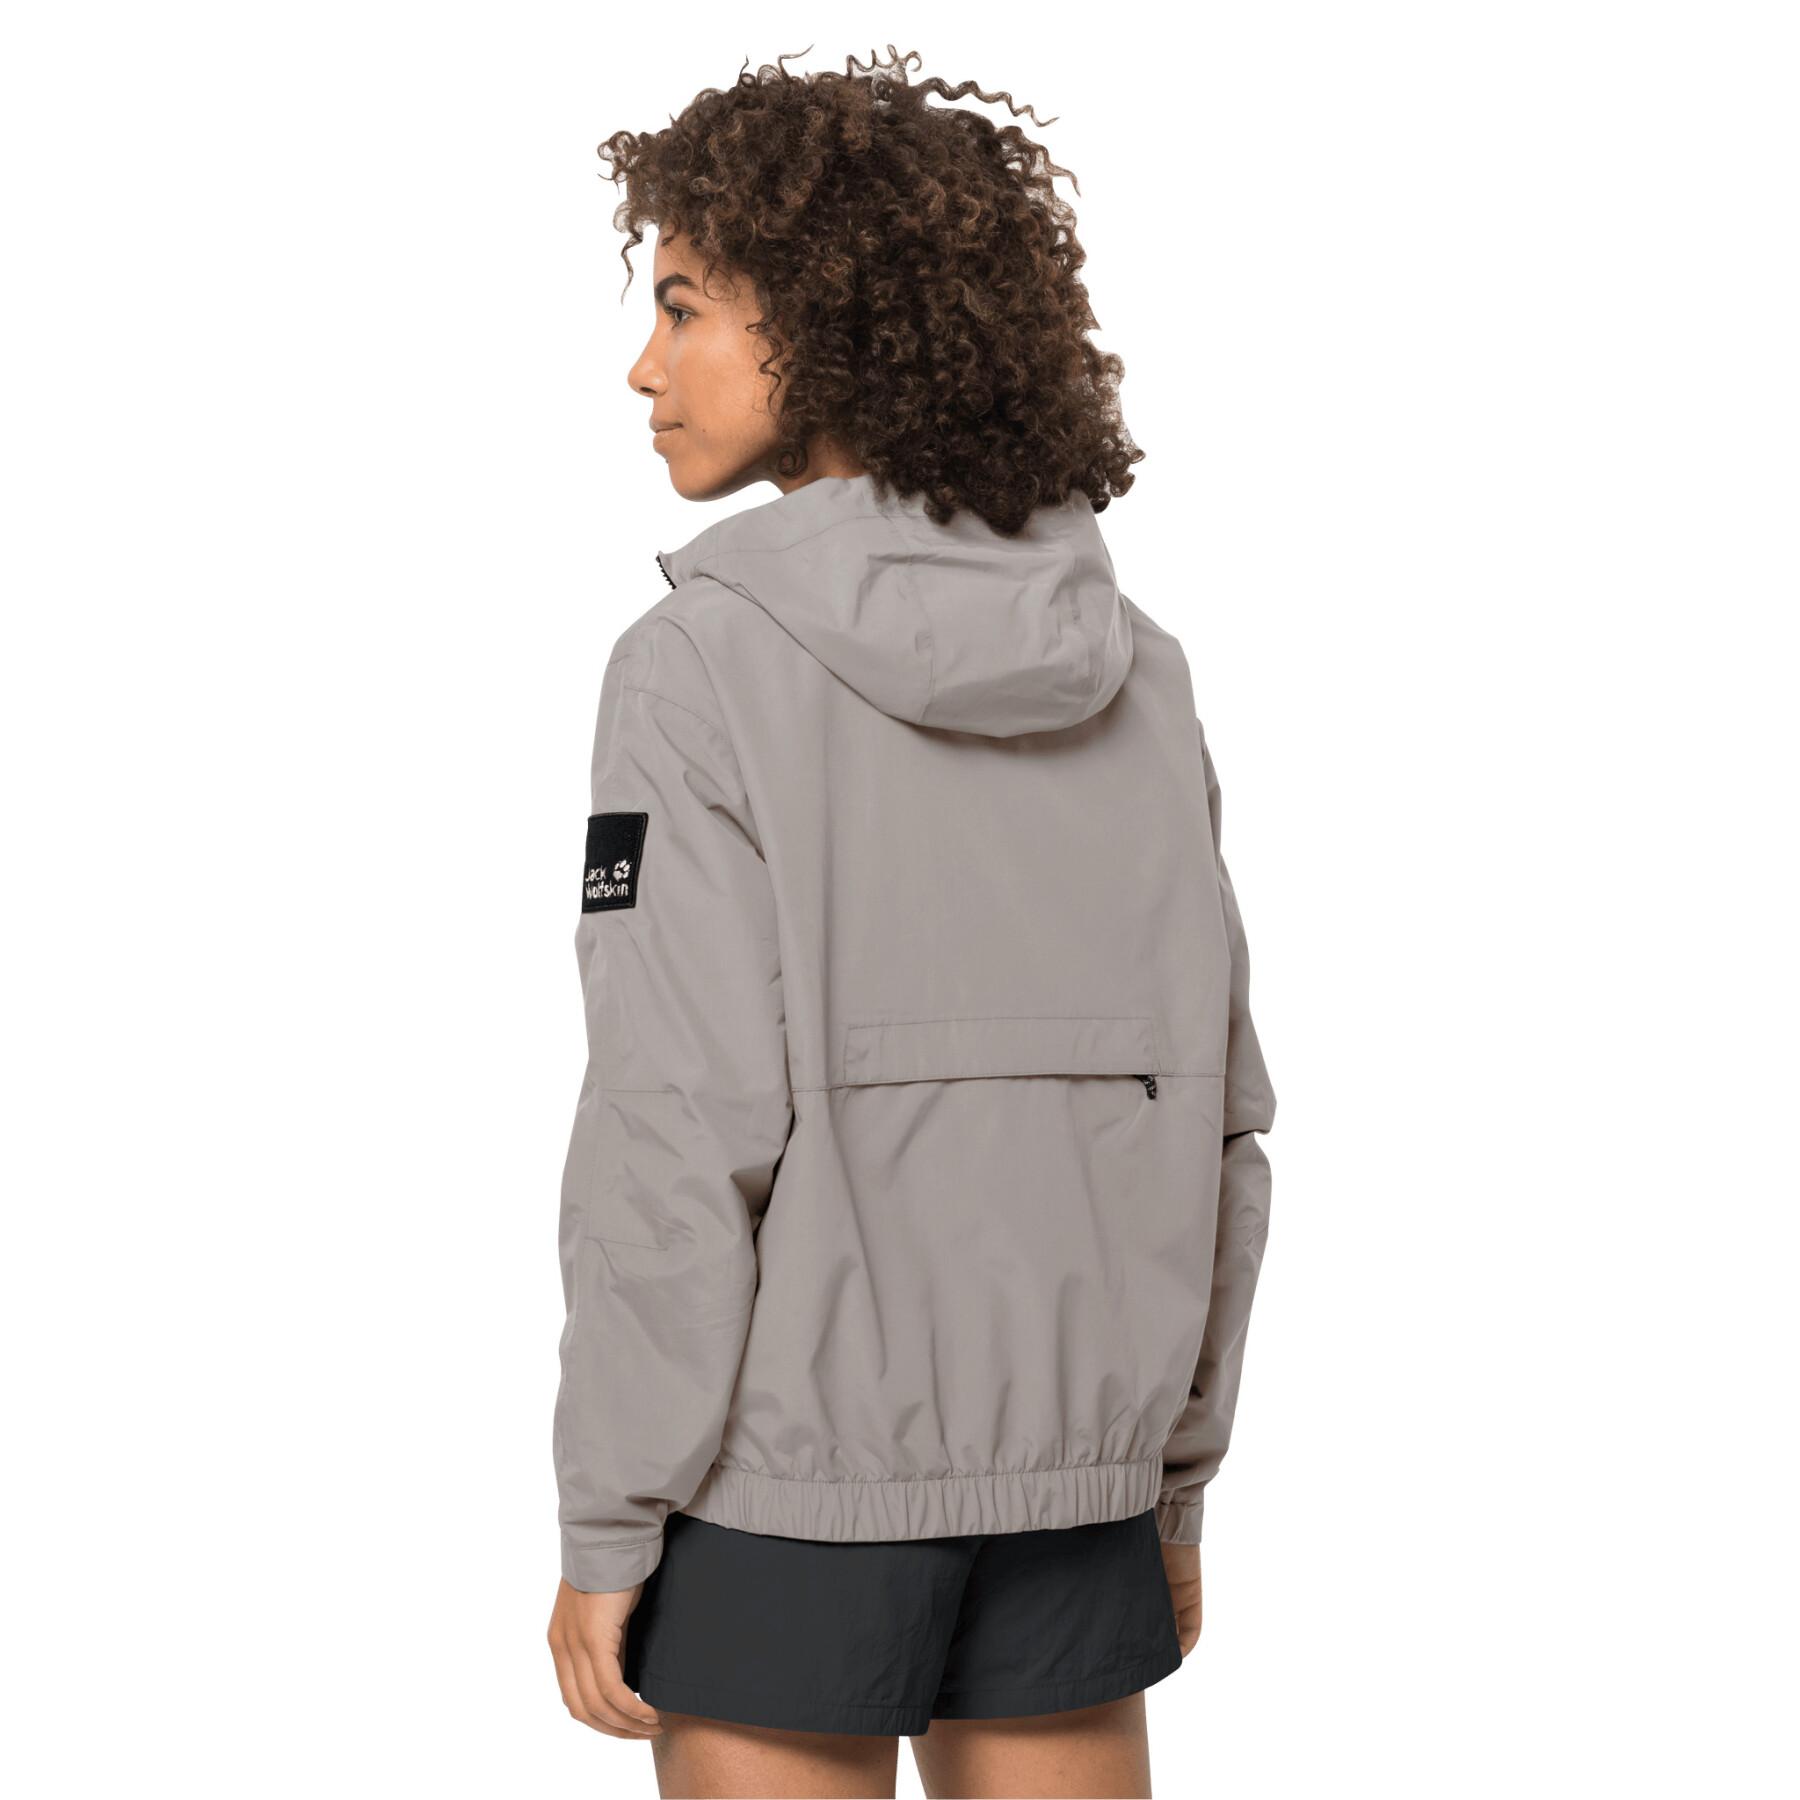 Chaqueta impermeable para mujer Jack Wolfskin 365 Rebel